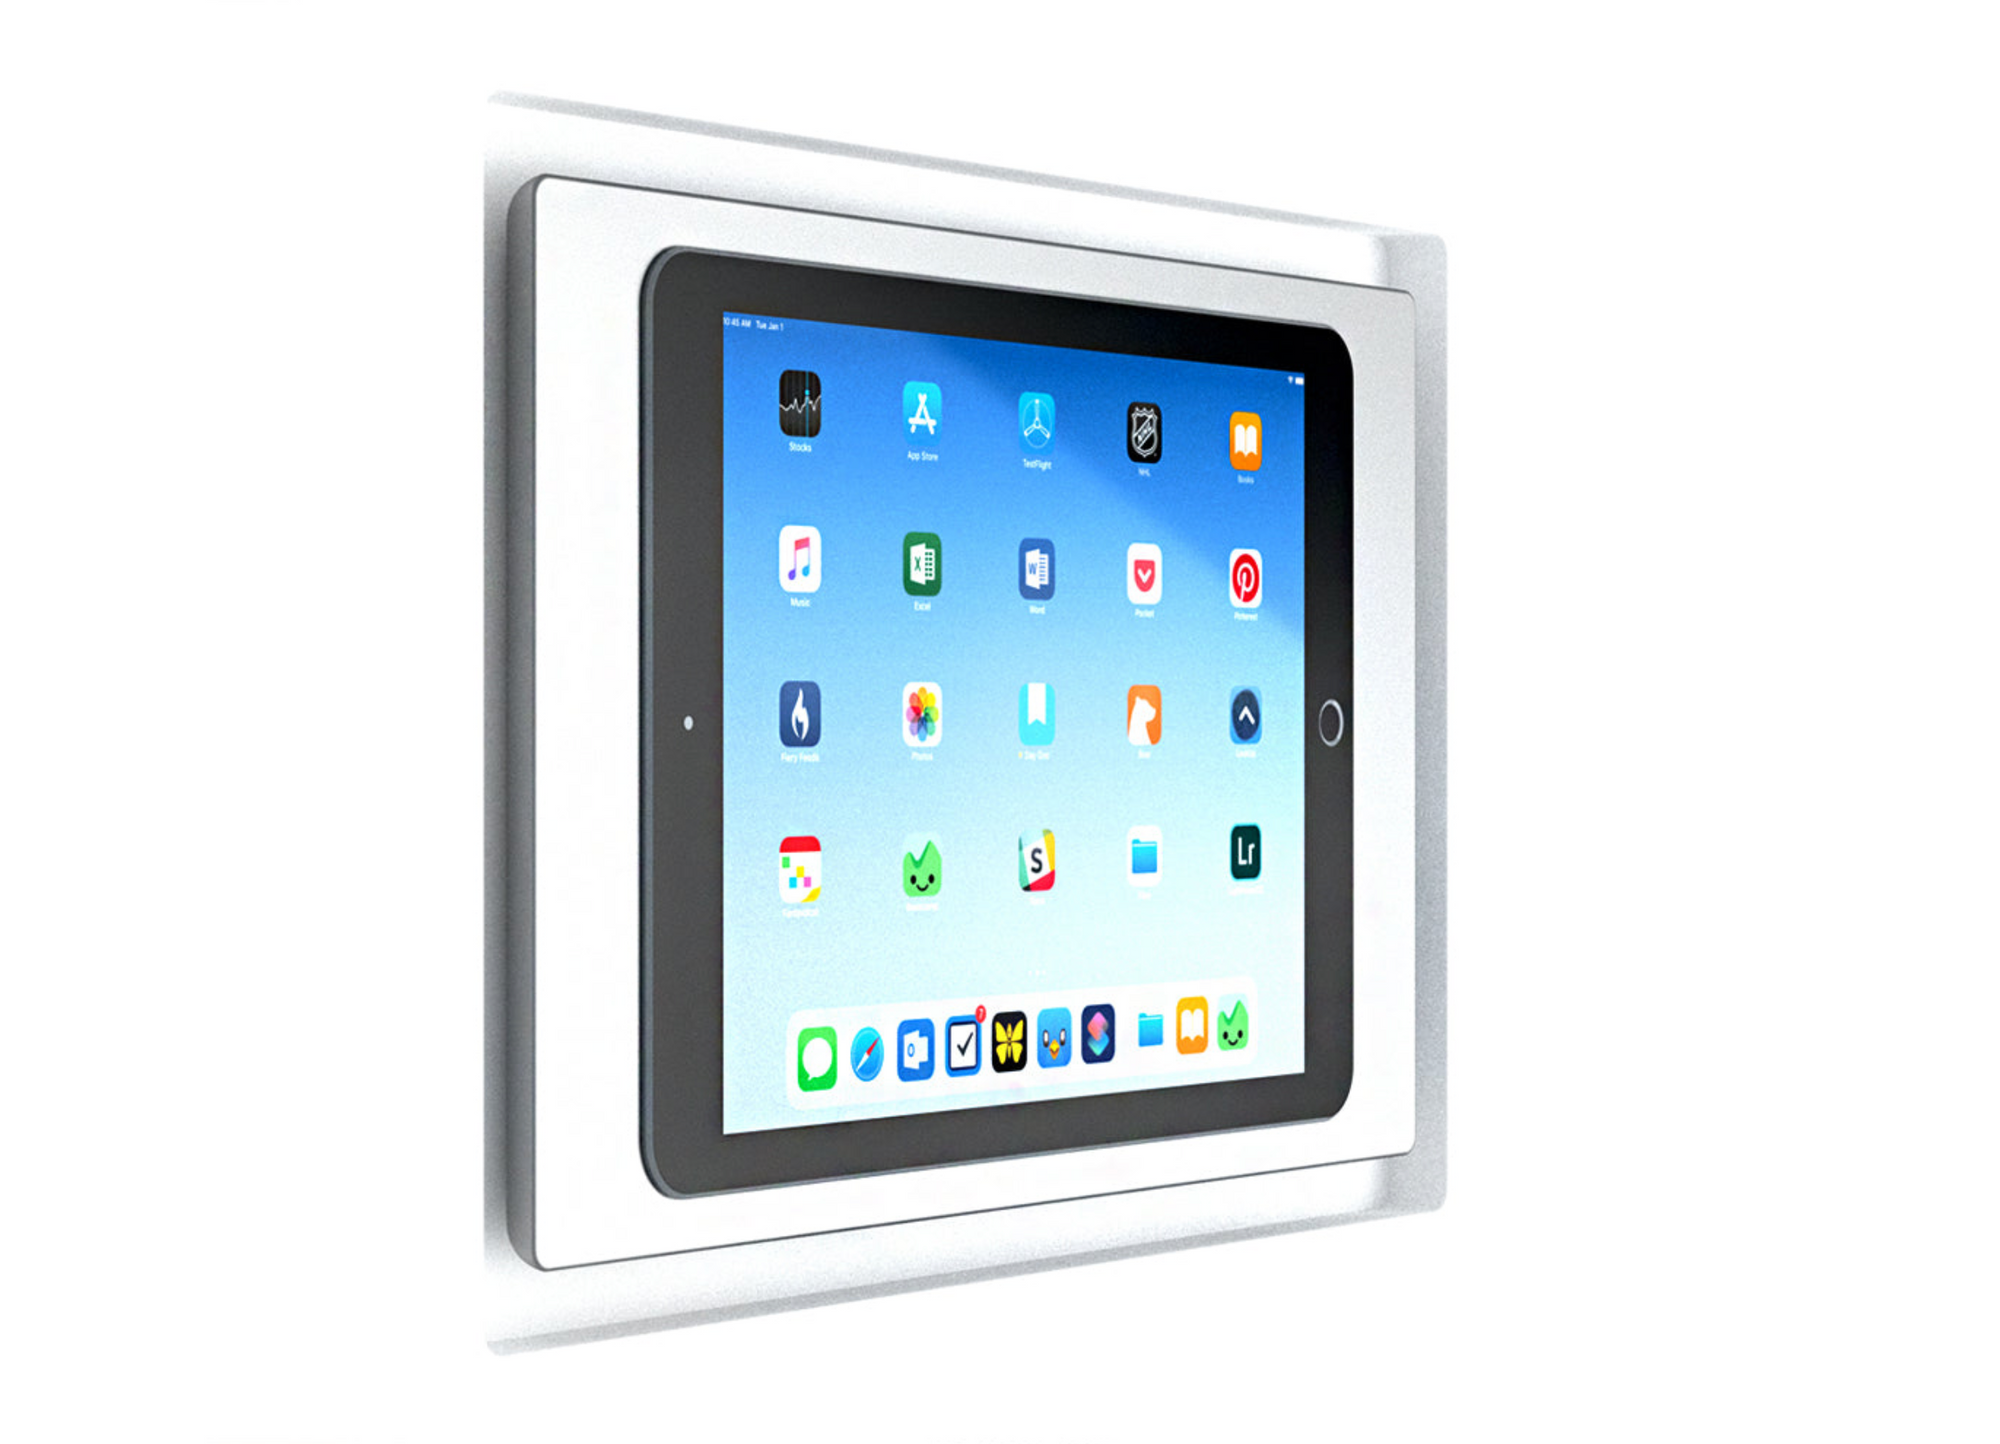 SL-IPCPS-375 Small iPad In-Wall Mount. iPad Designer Style In-Wall Plaster Mounting Platform - SMALL. Seamless Mounting Platform Upgrade. Update to New Seamless iPad Mounting Solution.